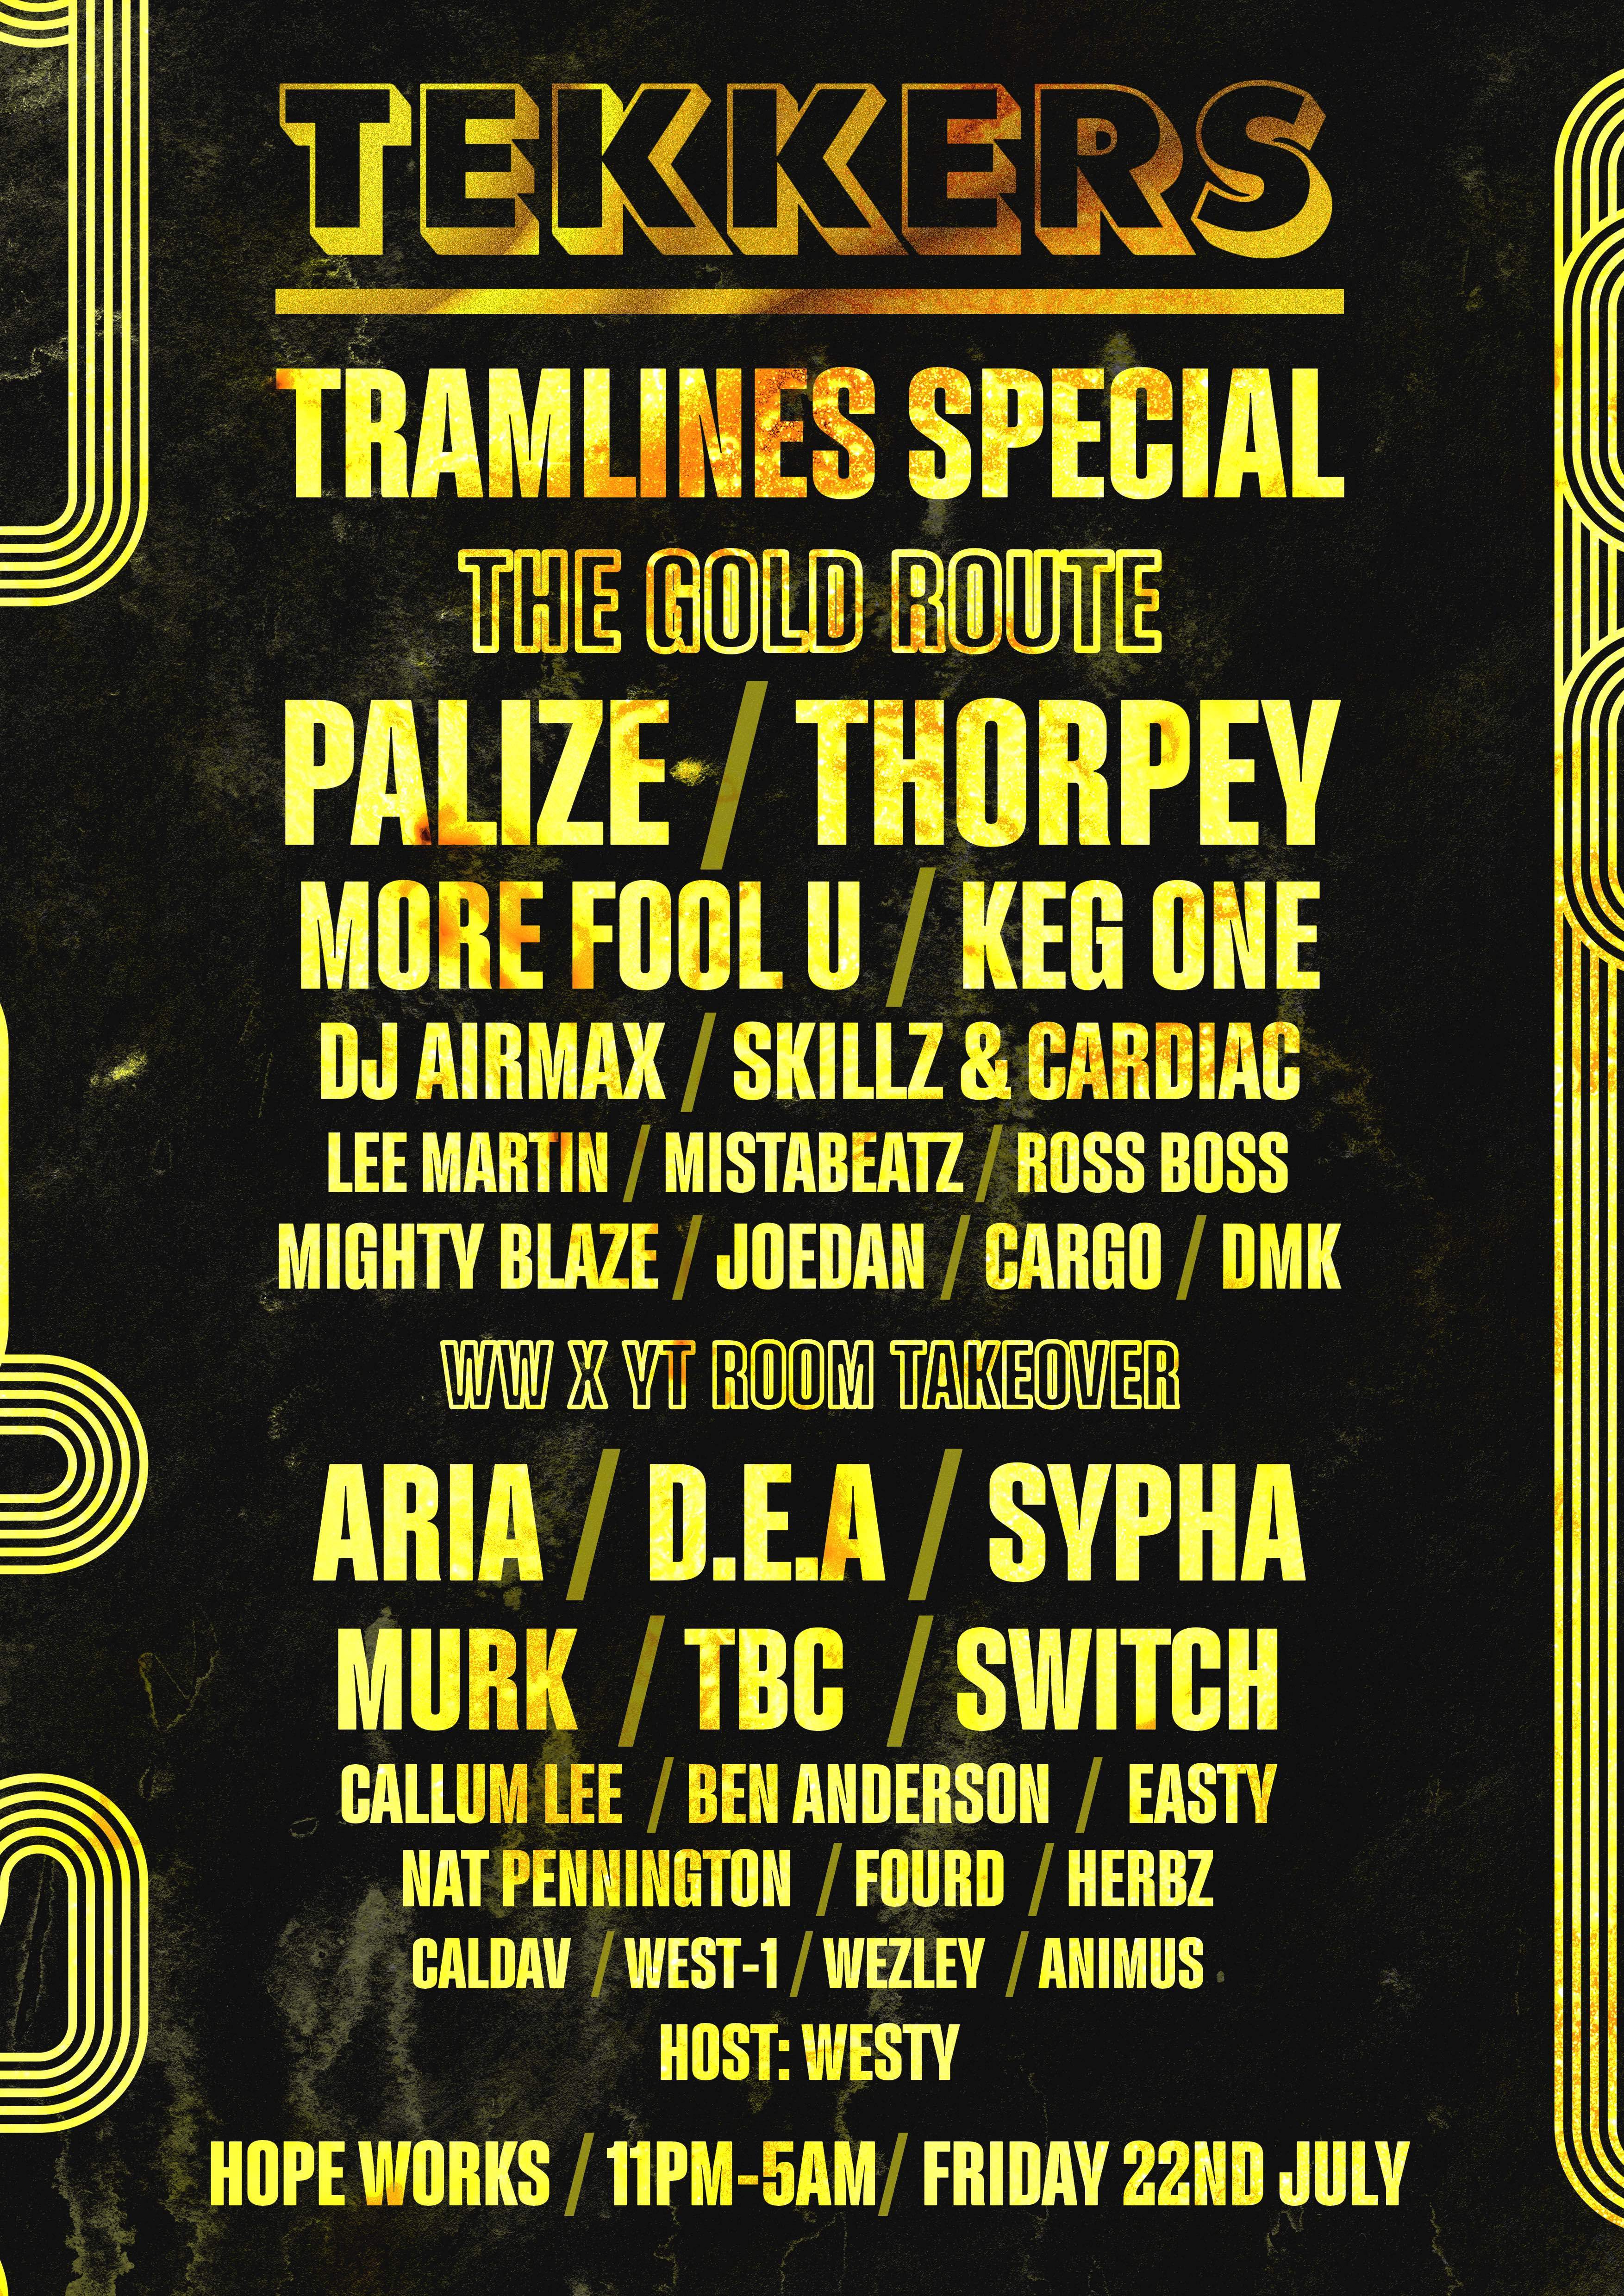 Tekkers Tramlines Special - The Gold Route Friday 22nd July - Página frontal